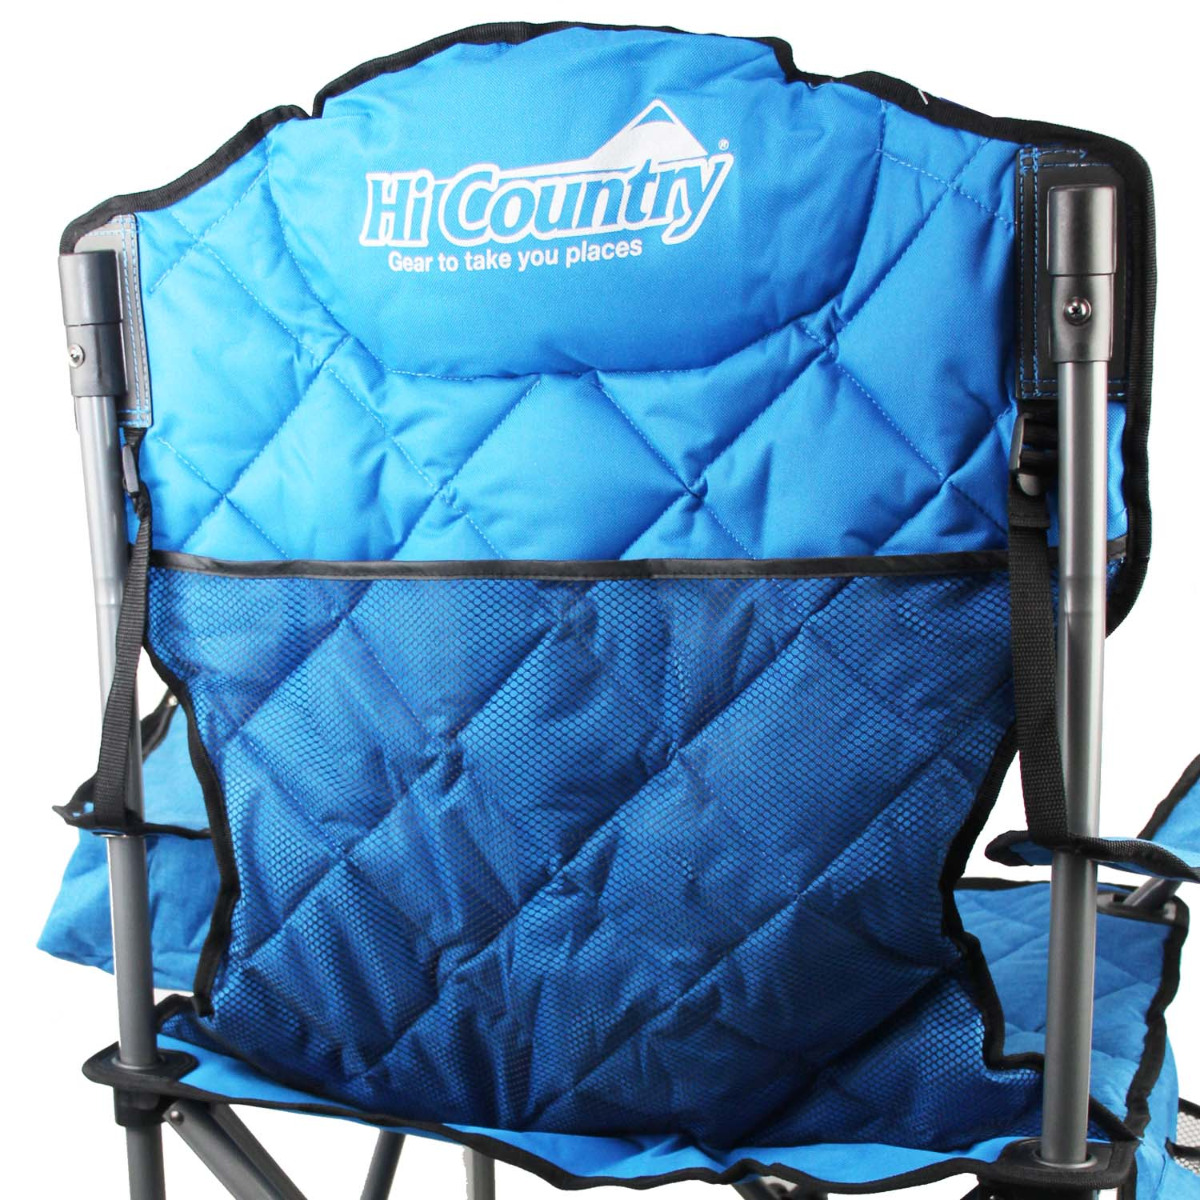 HI-COUNTRY DELUXE EXECUTIVE RESORT CHAIR BLUE